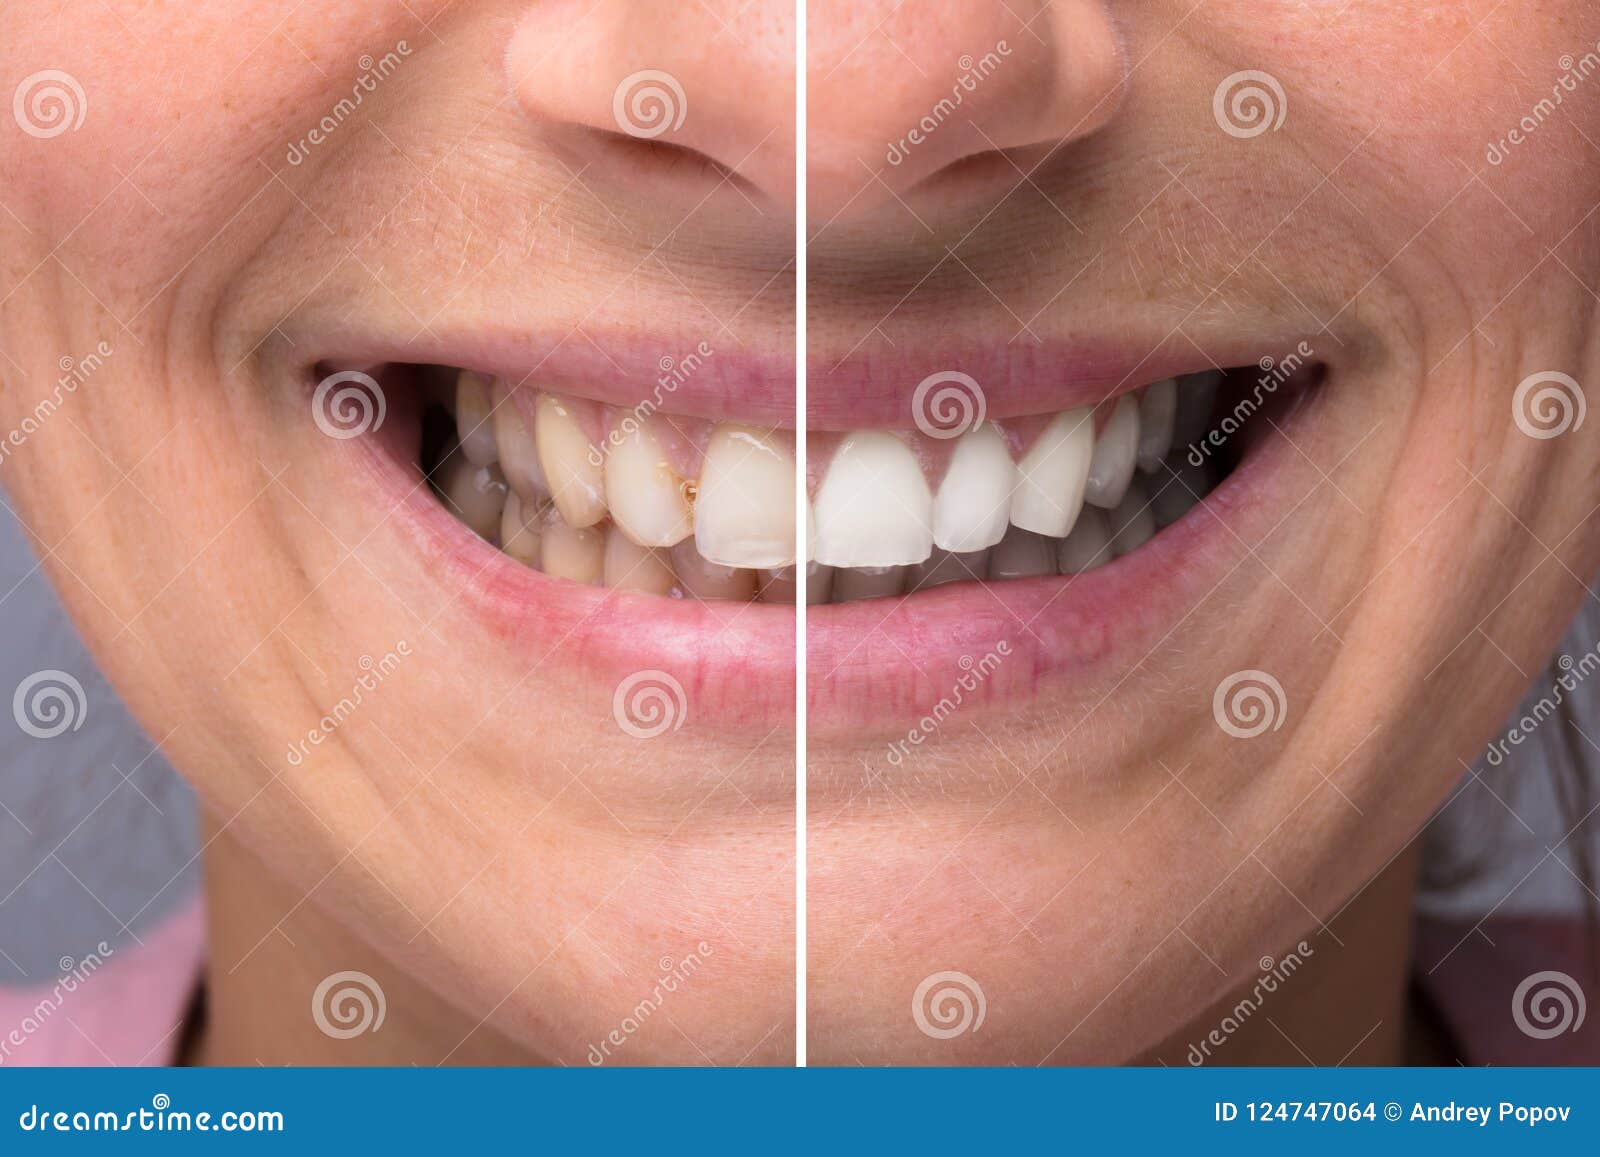 person teeth before and after whitening